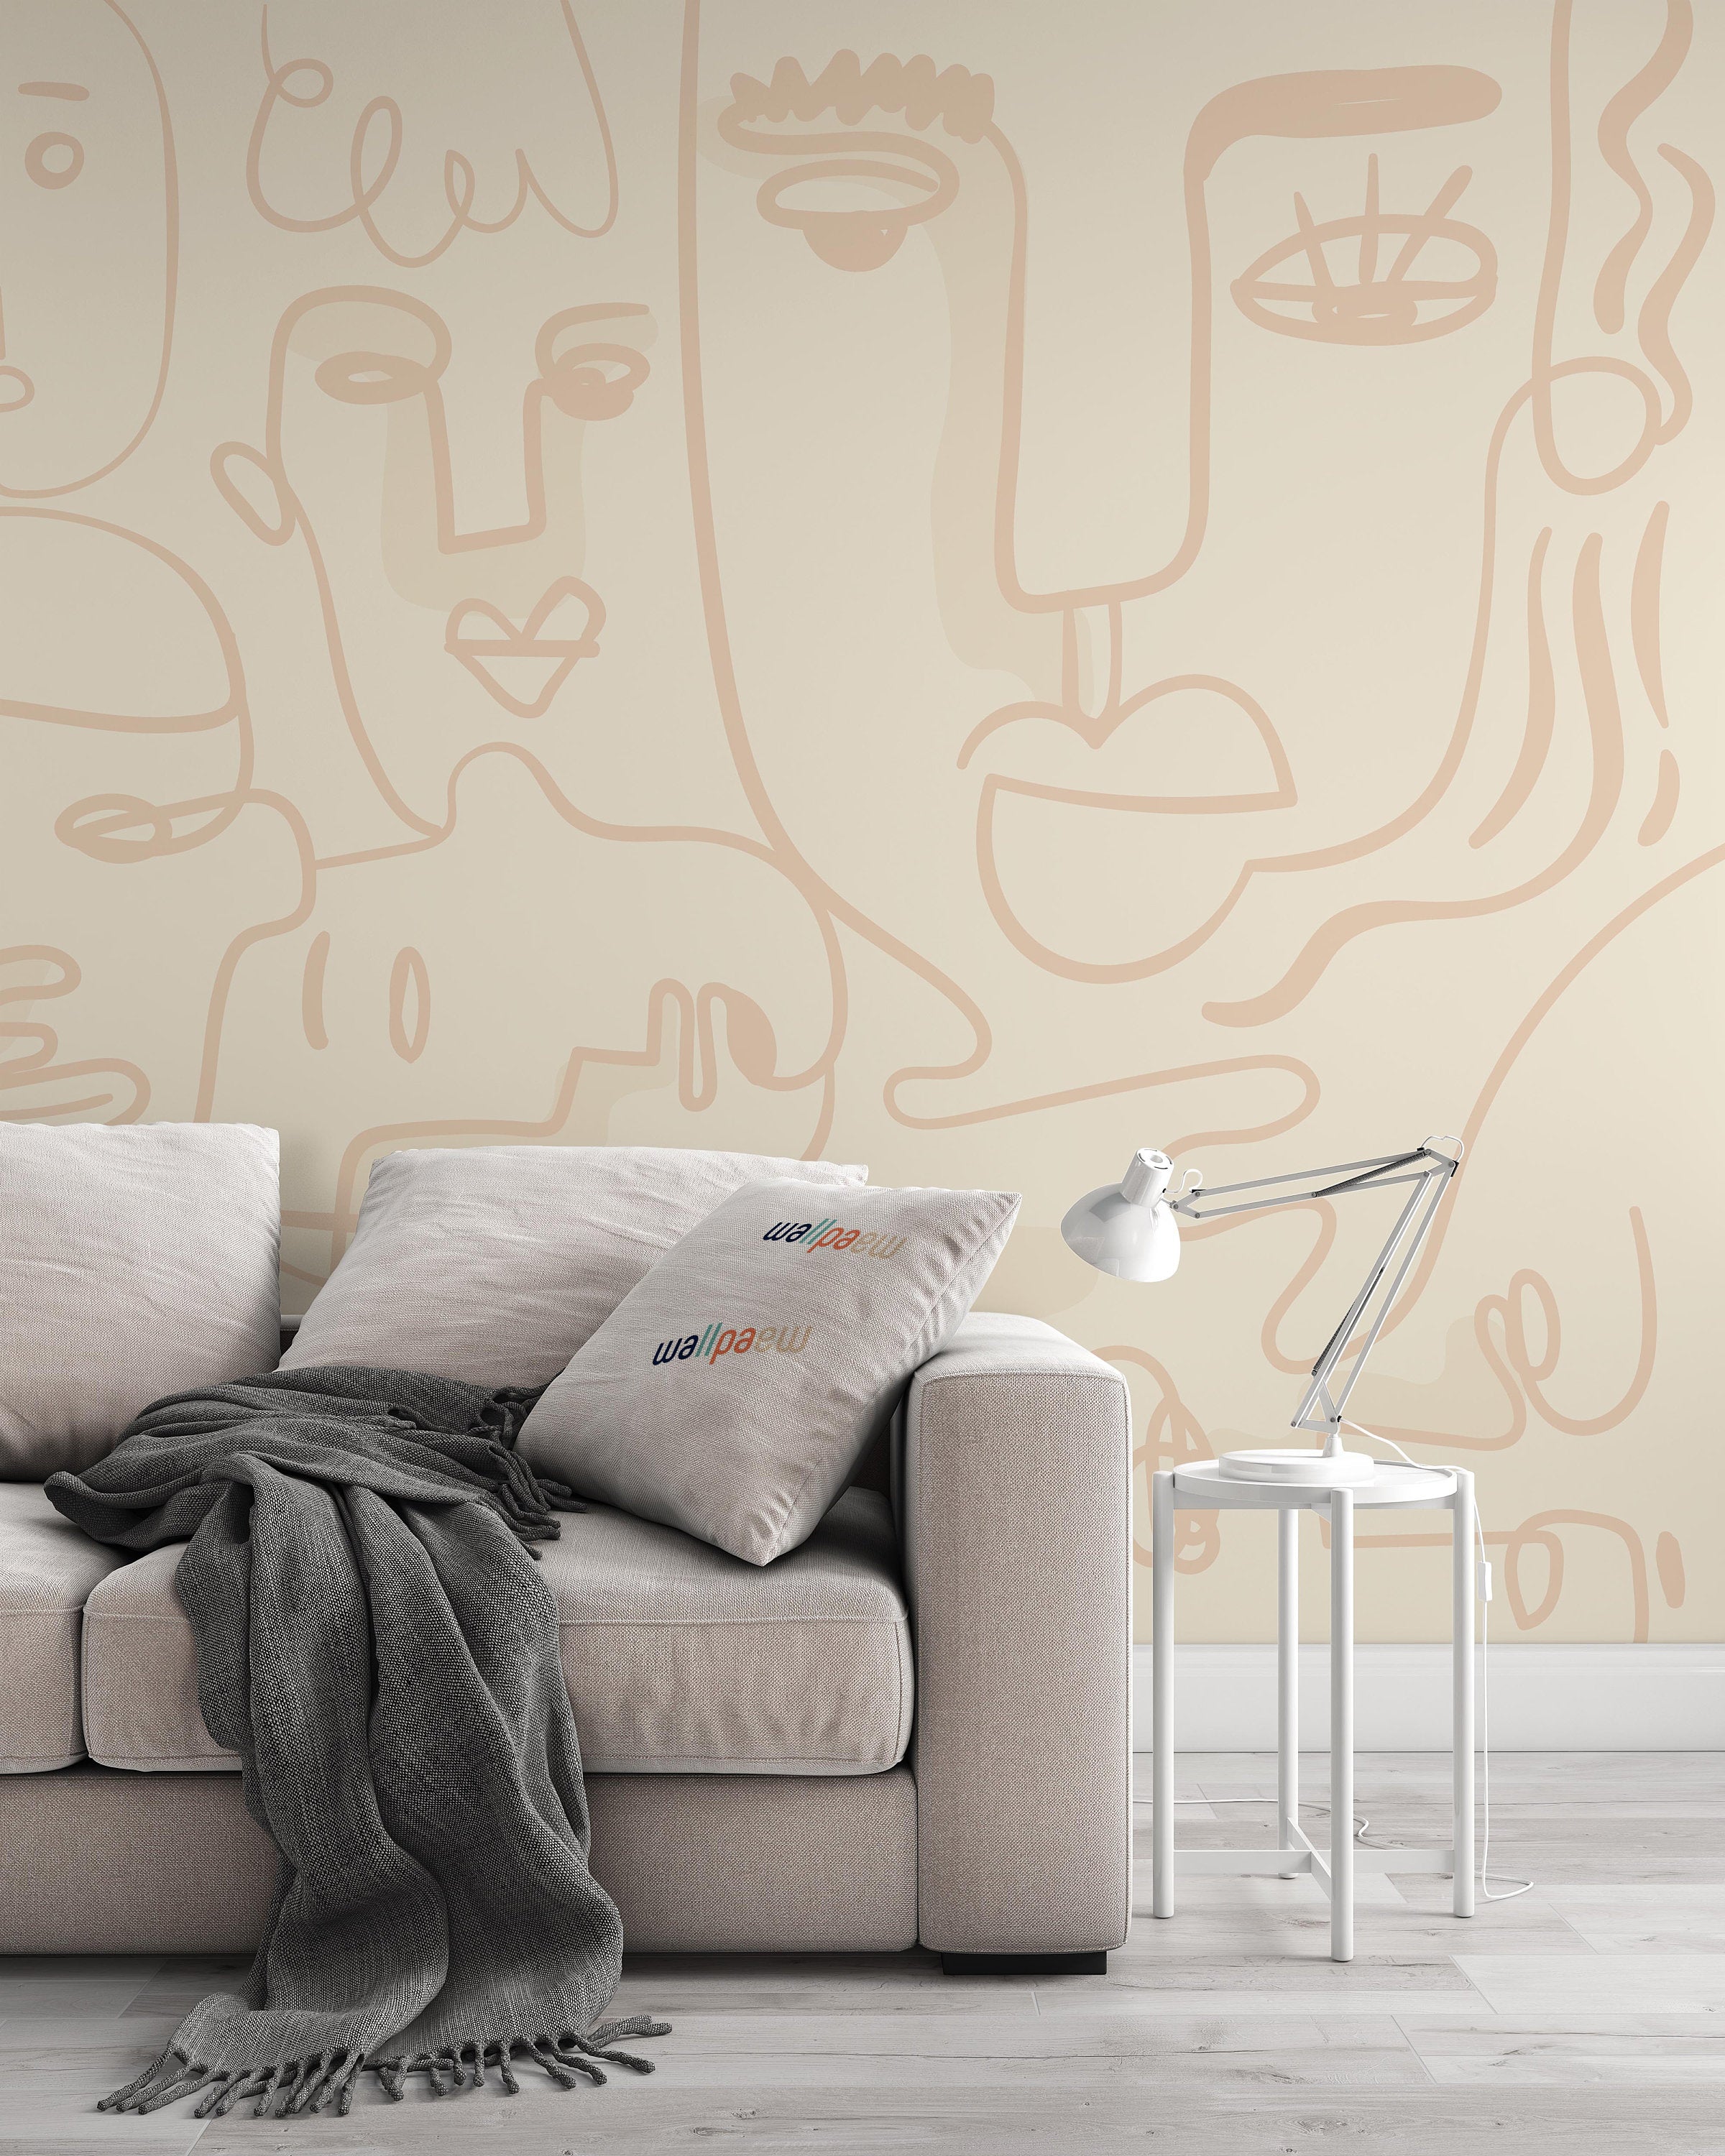 Abstract Human Face on The Beige Background Wallpaper Self Adhesive Peel & Stick Wall Sticker Wall Decoration Scandinavian Design Removable